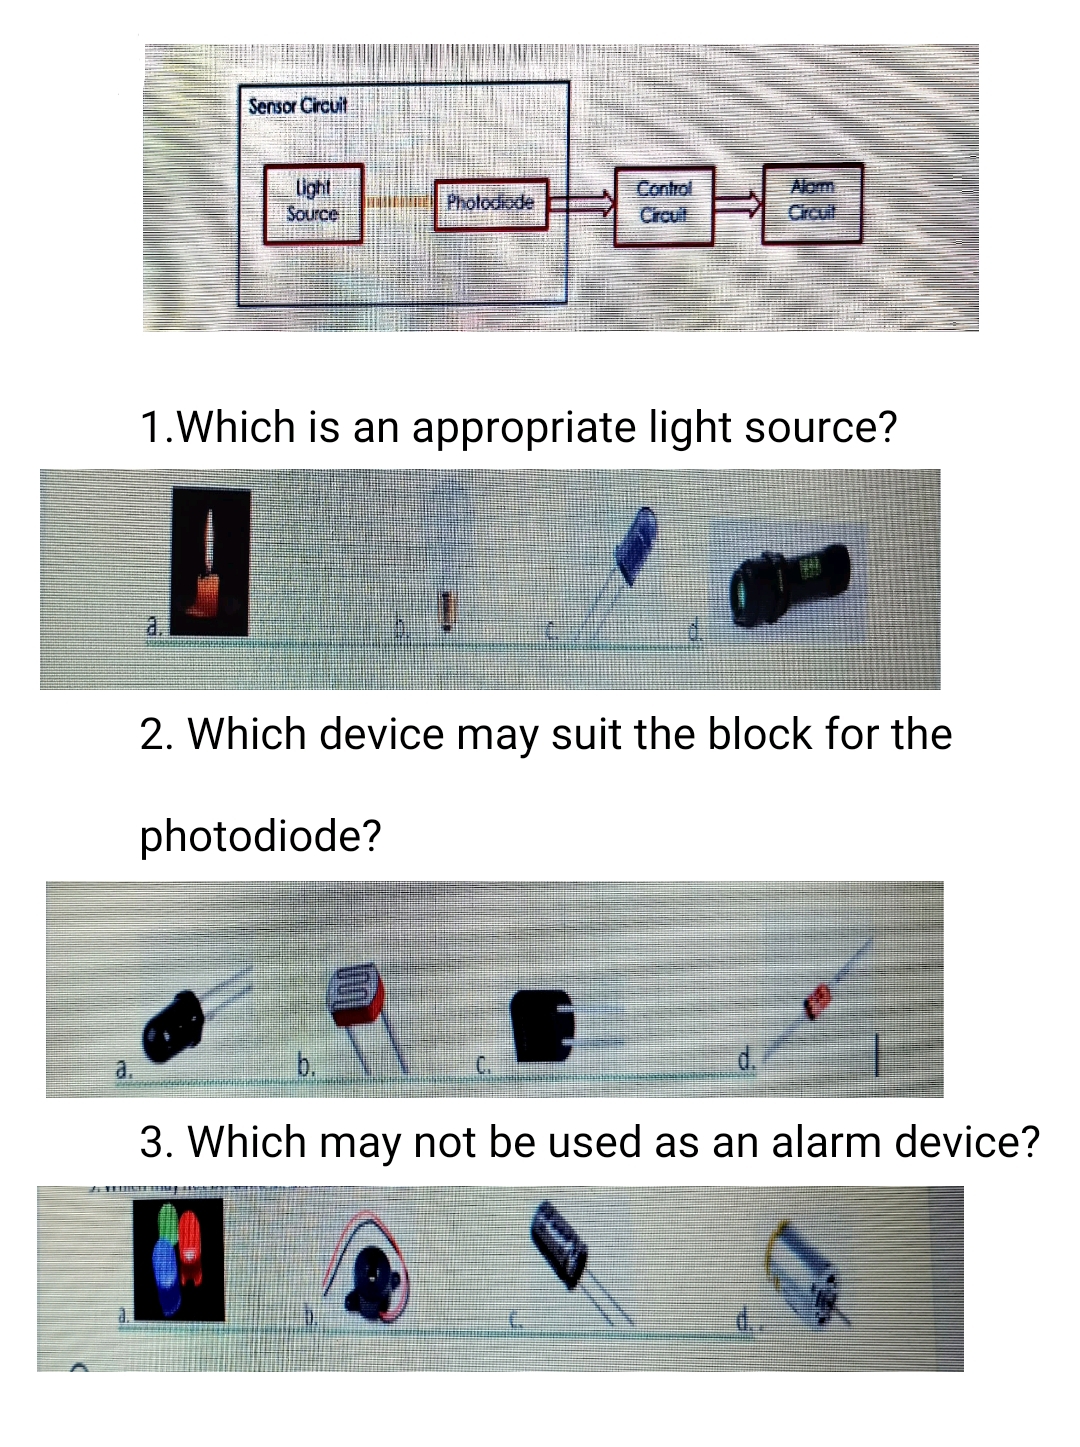 Sensor Circuit
light
Source
Control
Crcut
Alom
Crcuit
Photodiode
1.Which is an appropriate light source?
a.
2. Which device may suit the block for the
photodiode?
b.
C.
d.
a.
3. Which may not be used as an alarm device?
